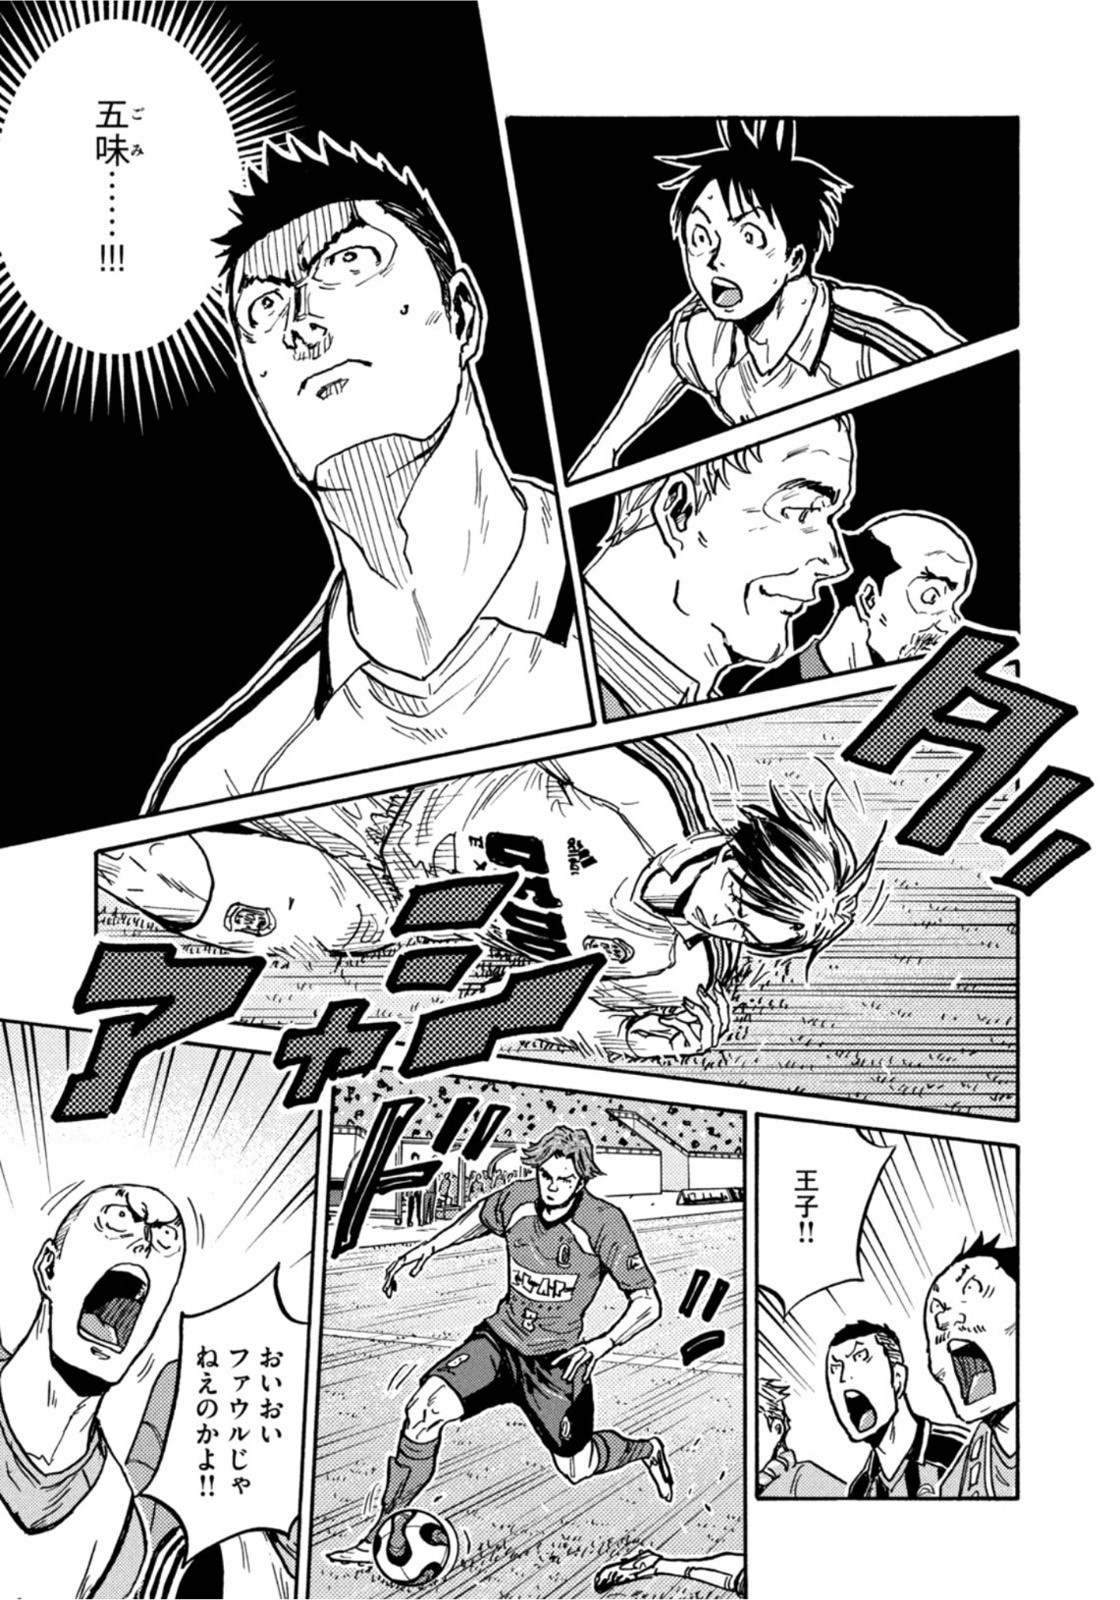 Giant Killing - Chapter 611 - Page 4